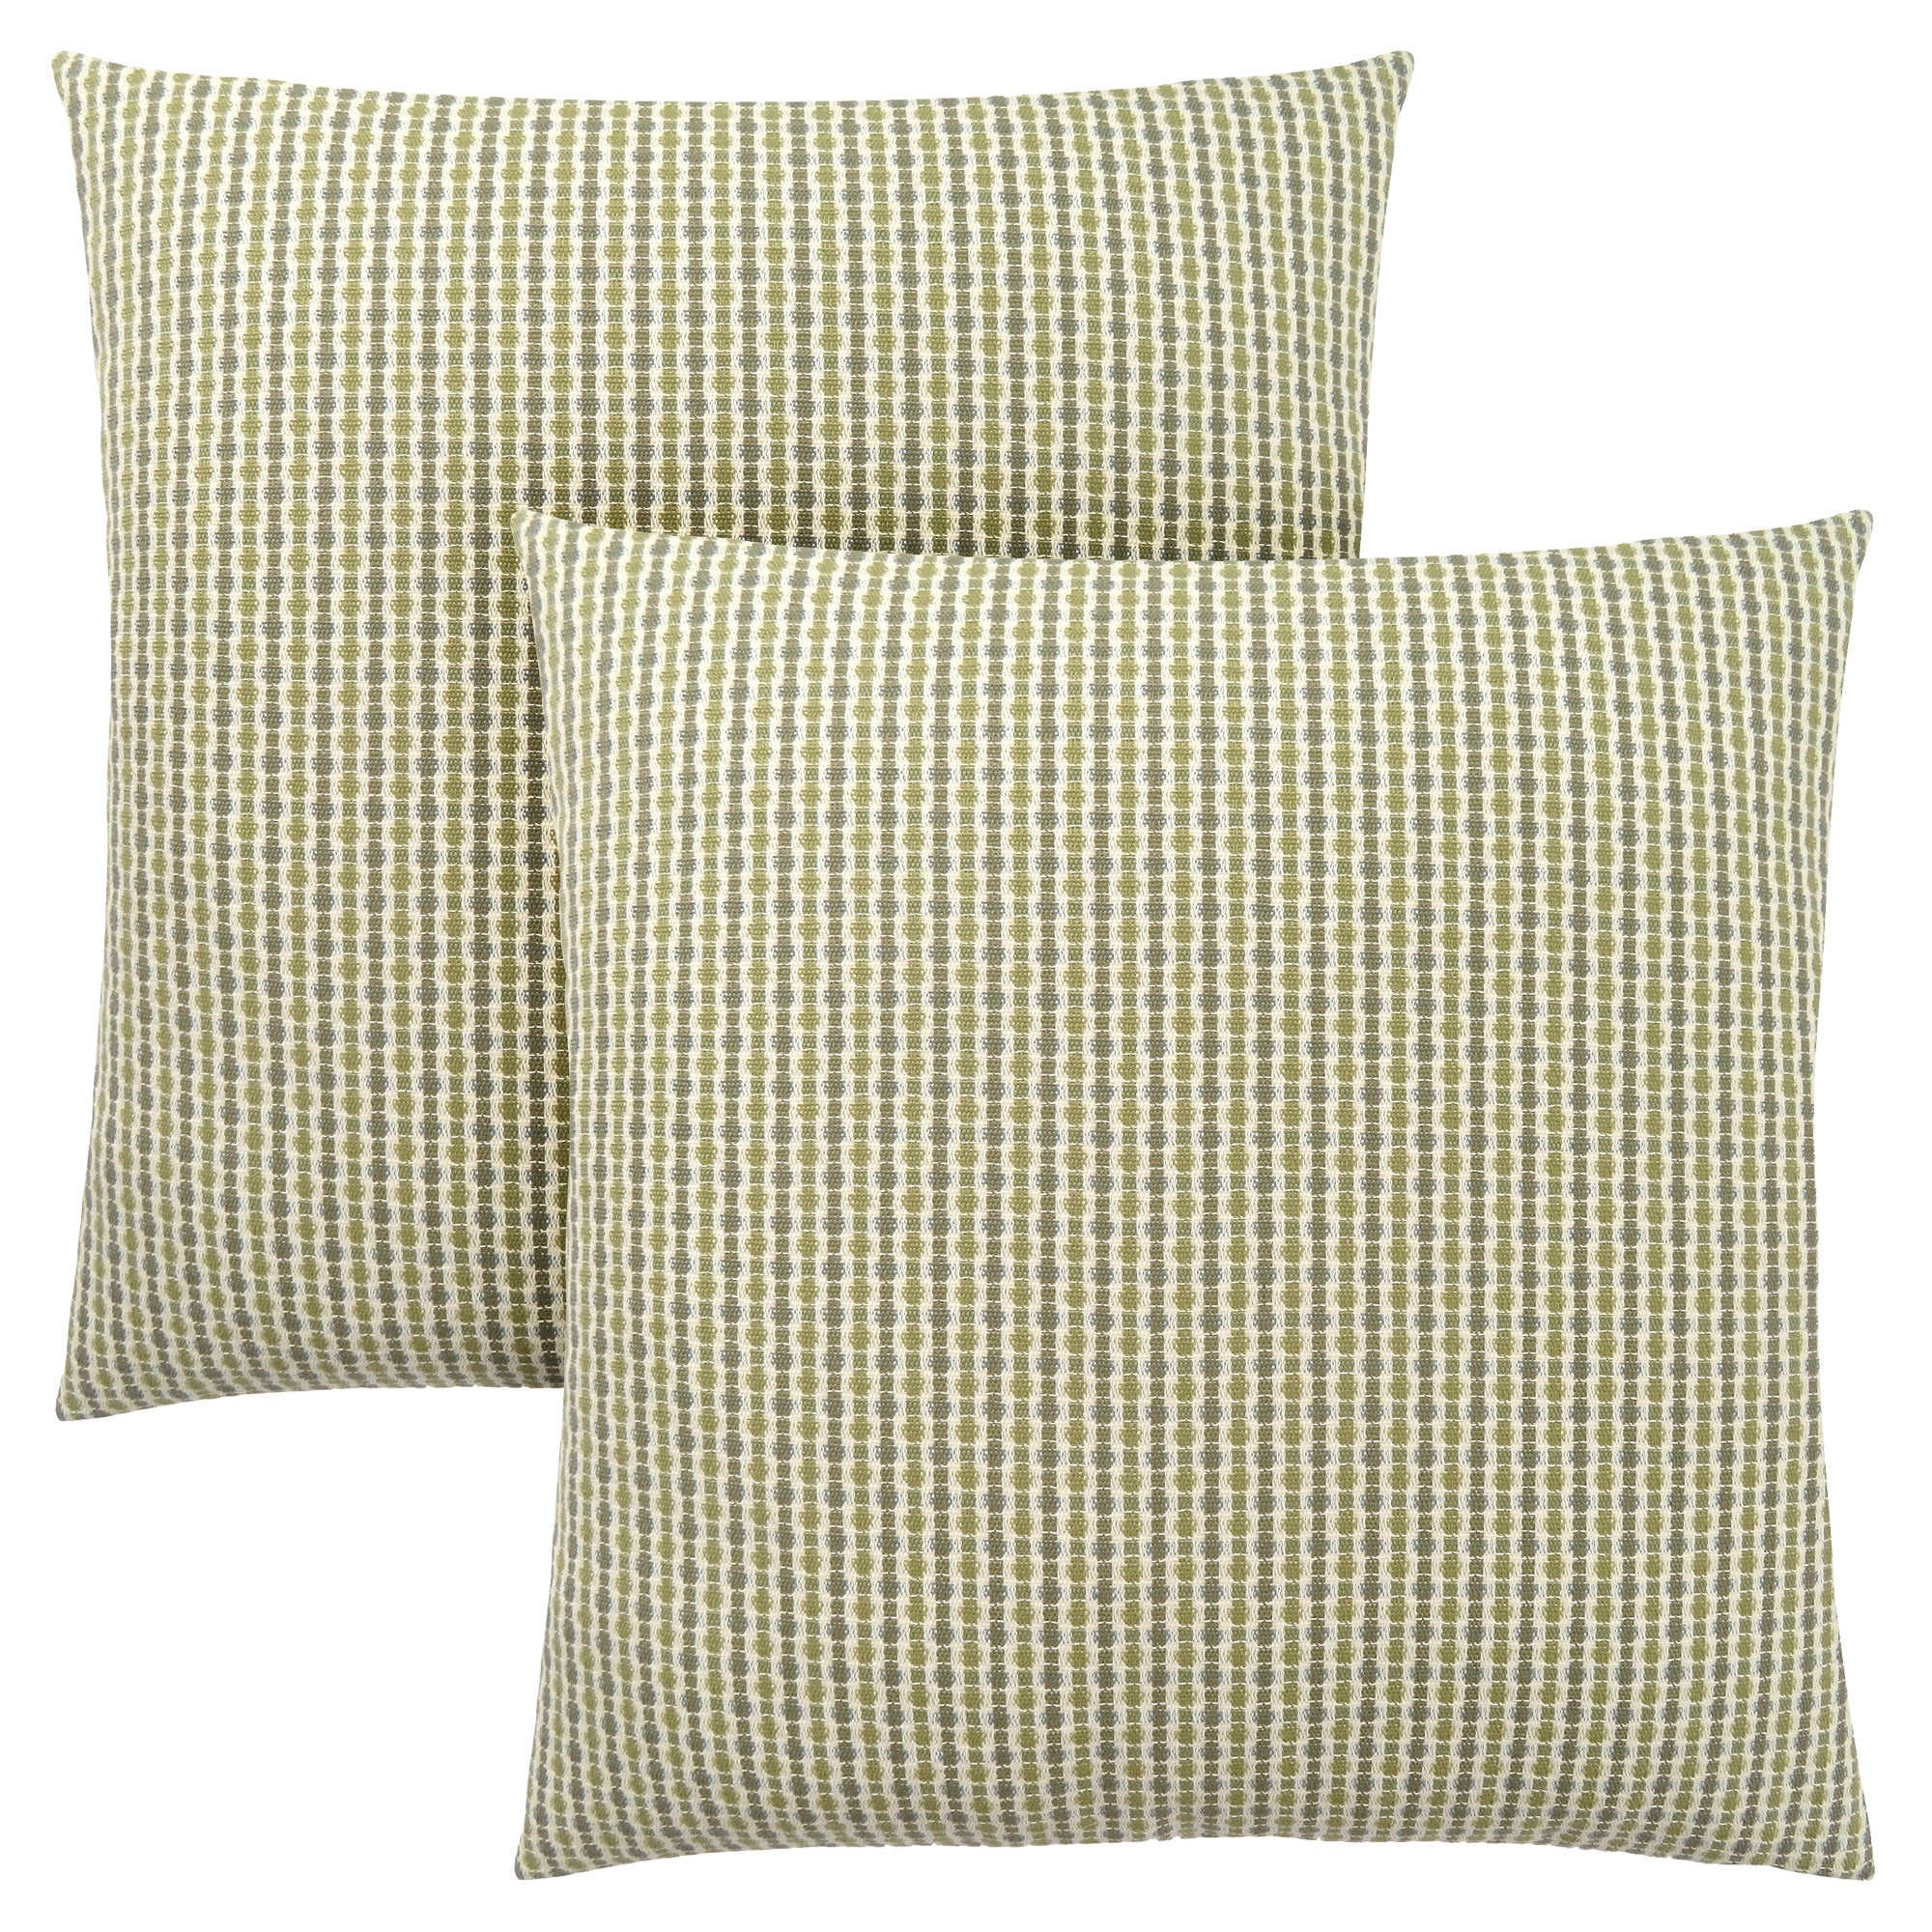 MN-459233    Pillows, Set Of 2, 18 X 18 Square, Insert Included, Decorative Throw, Accent, Sofa, Couch, Bed, Soft Polyester Woven Fabric, Hypoallergenic Soft Polyester Insert, Light And Dark Green, Abstract Dot Design, Classic Dot Design, Classic